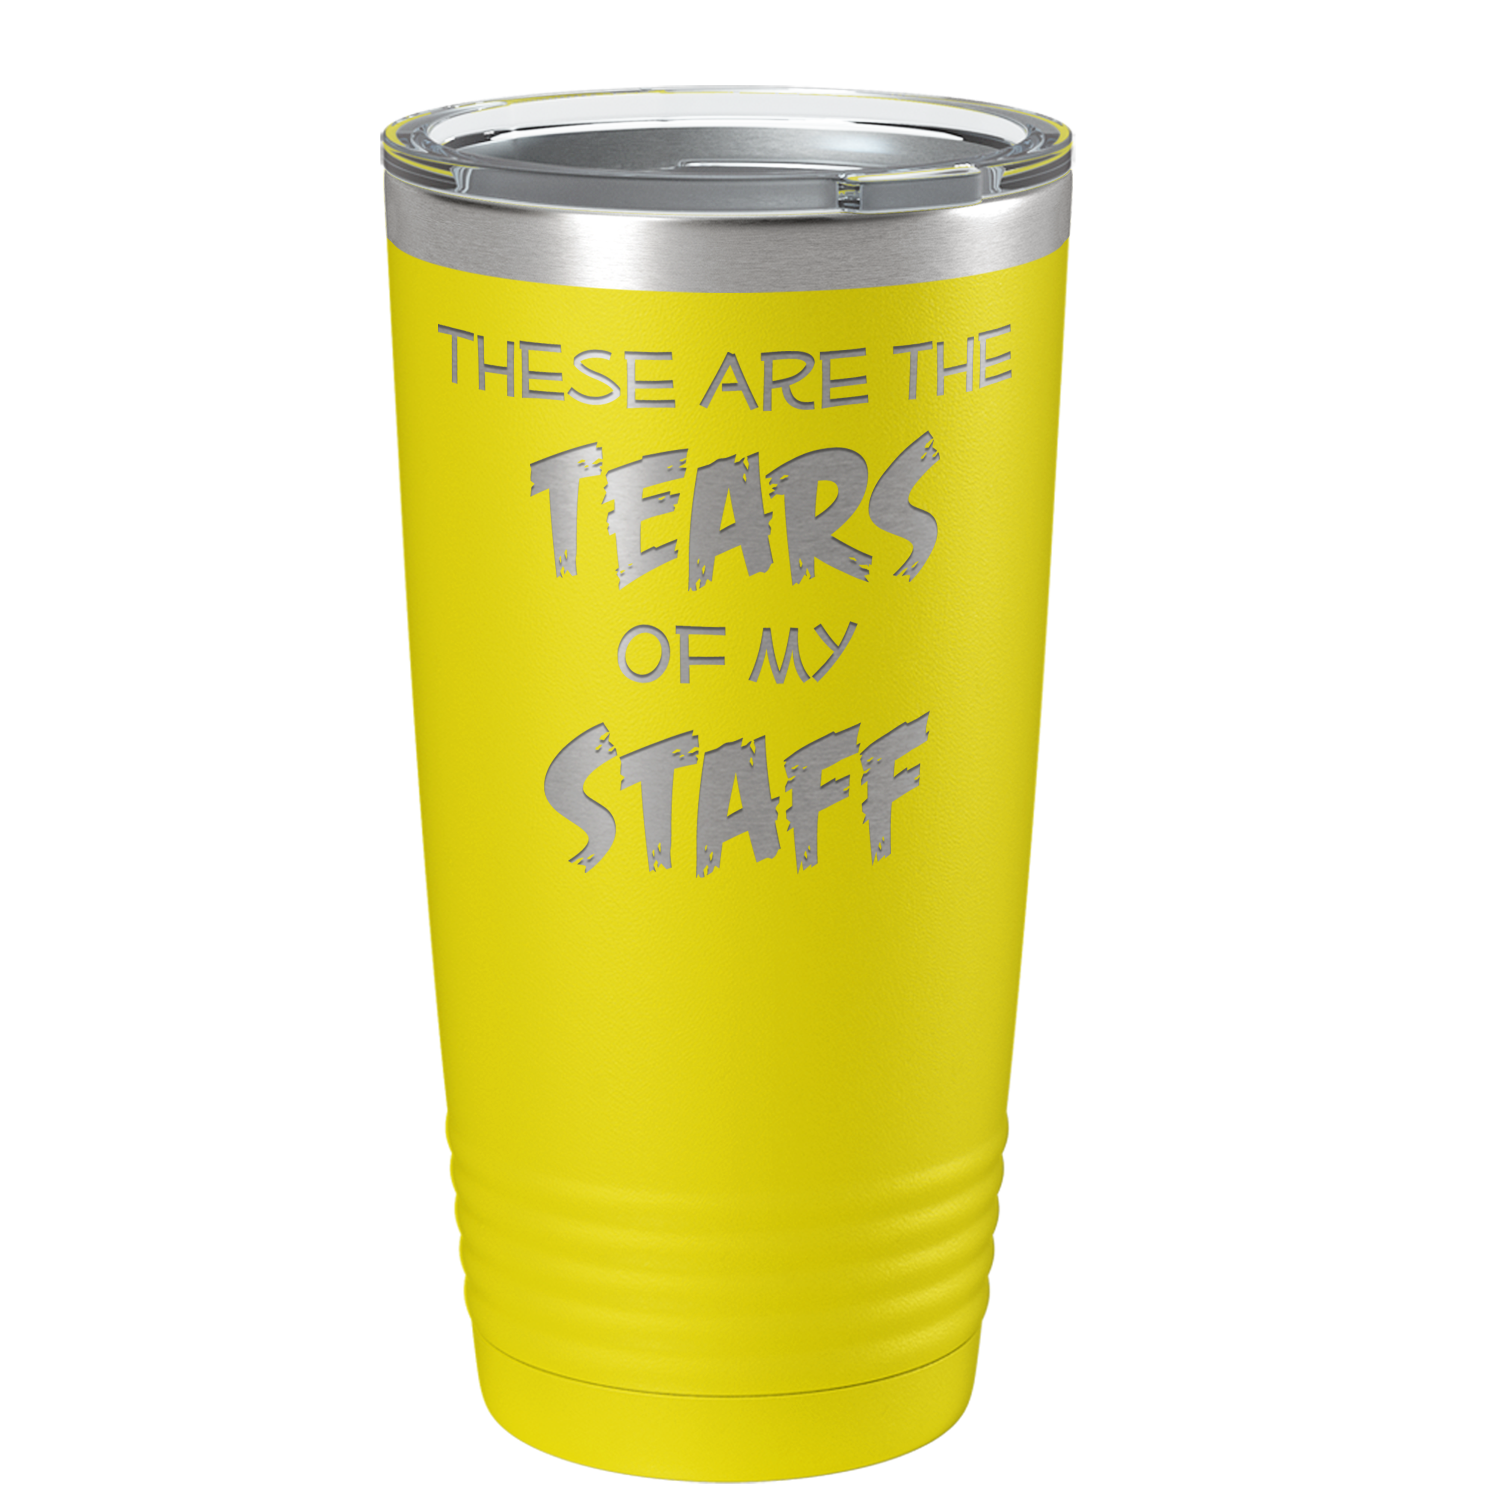 These are Tears of my Staff on Yellow 20 oz Stainless Steel Ringneck Tumbler